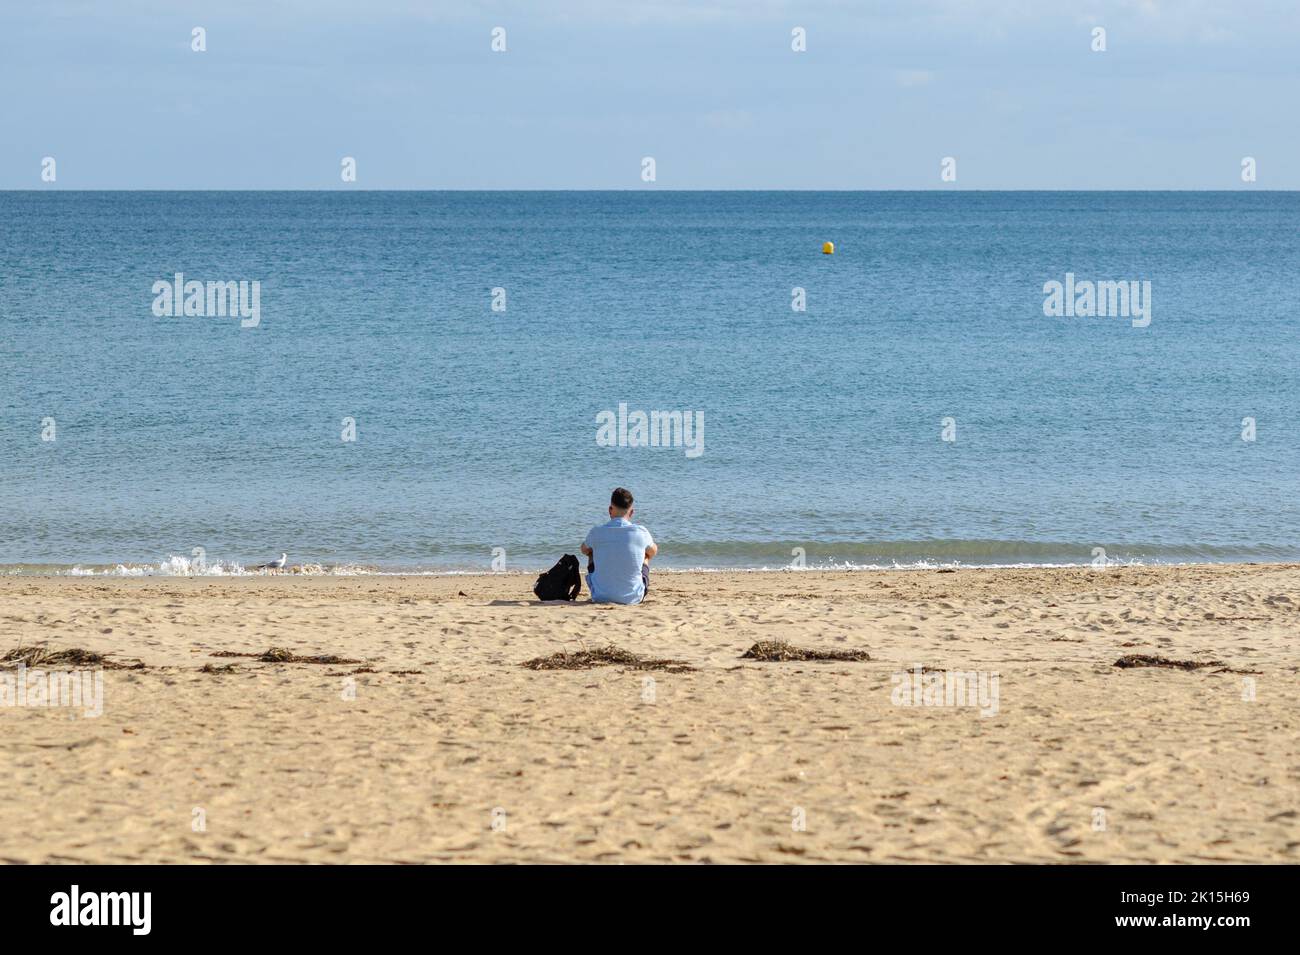 Bournemouth, Dorset, England, UK, 15th September 2022, Weather. All is quiet on the beach during the afternoon in early autumn sunshine. A man sits alone at the water’s edge contemplating. Credit: Paul Biggins/Alamy Live News Stock Photo